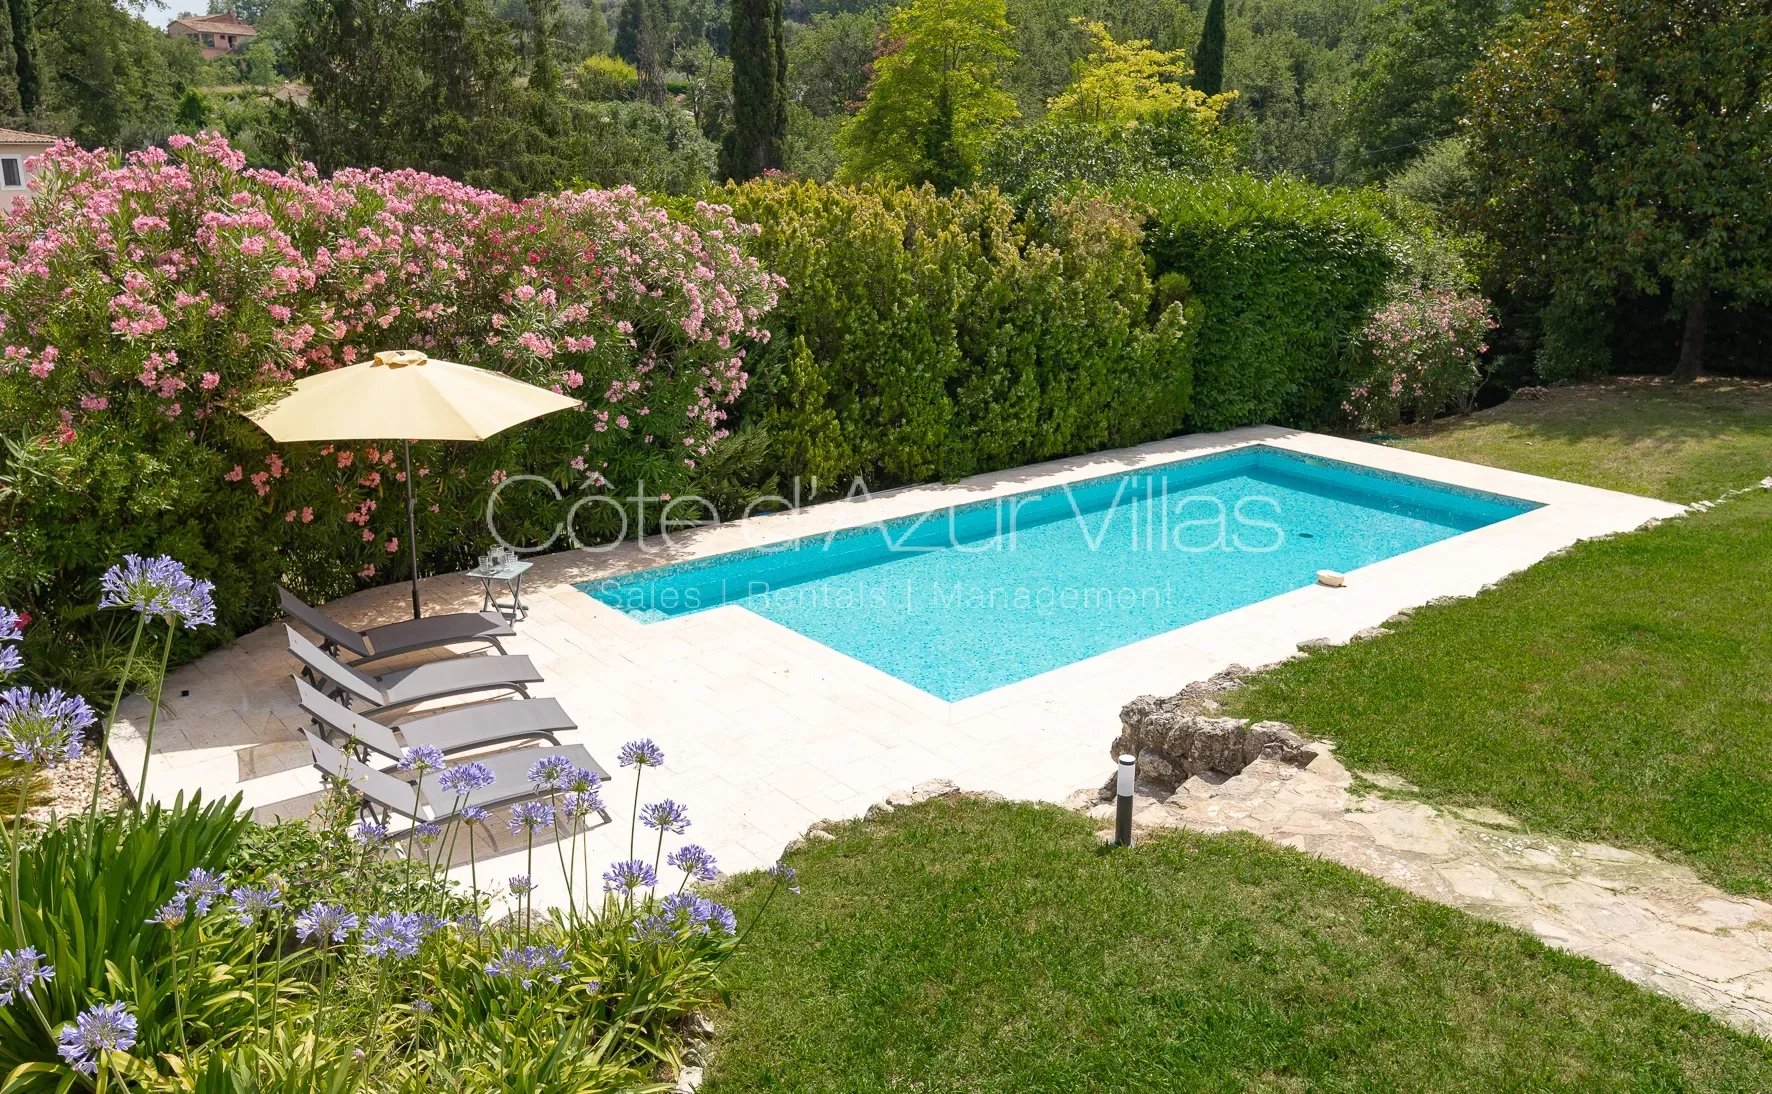 In absolute calm, a sublimely-renovated 5 bedroom stone bergerie